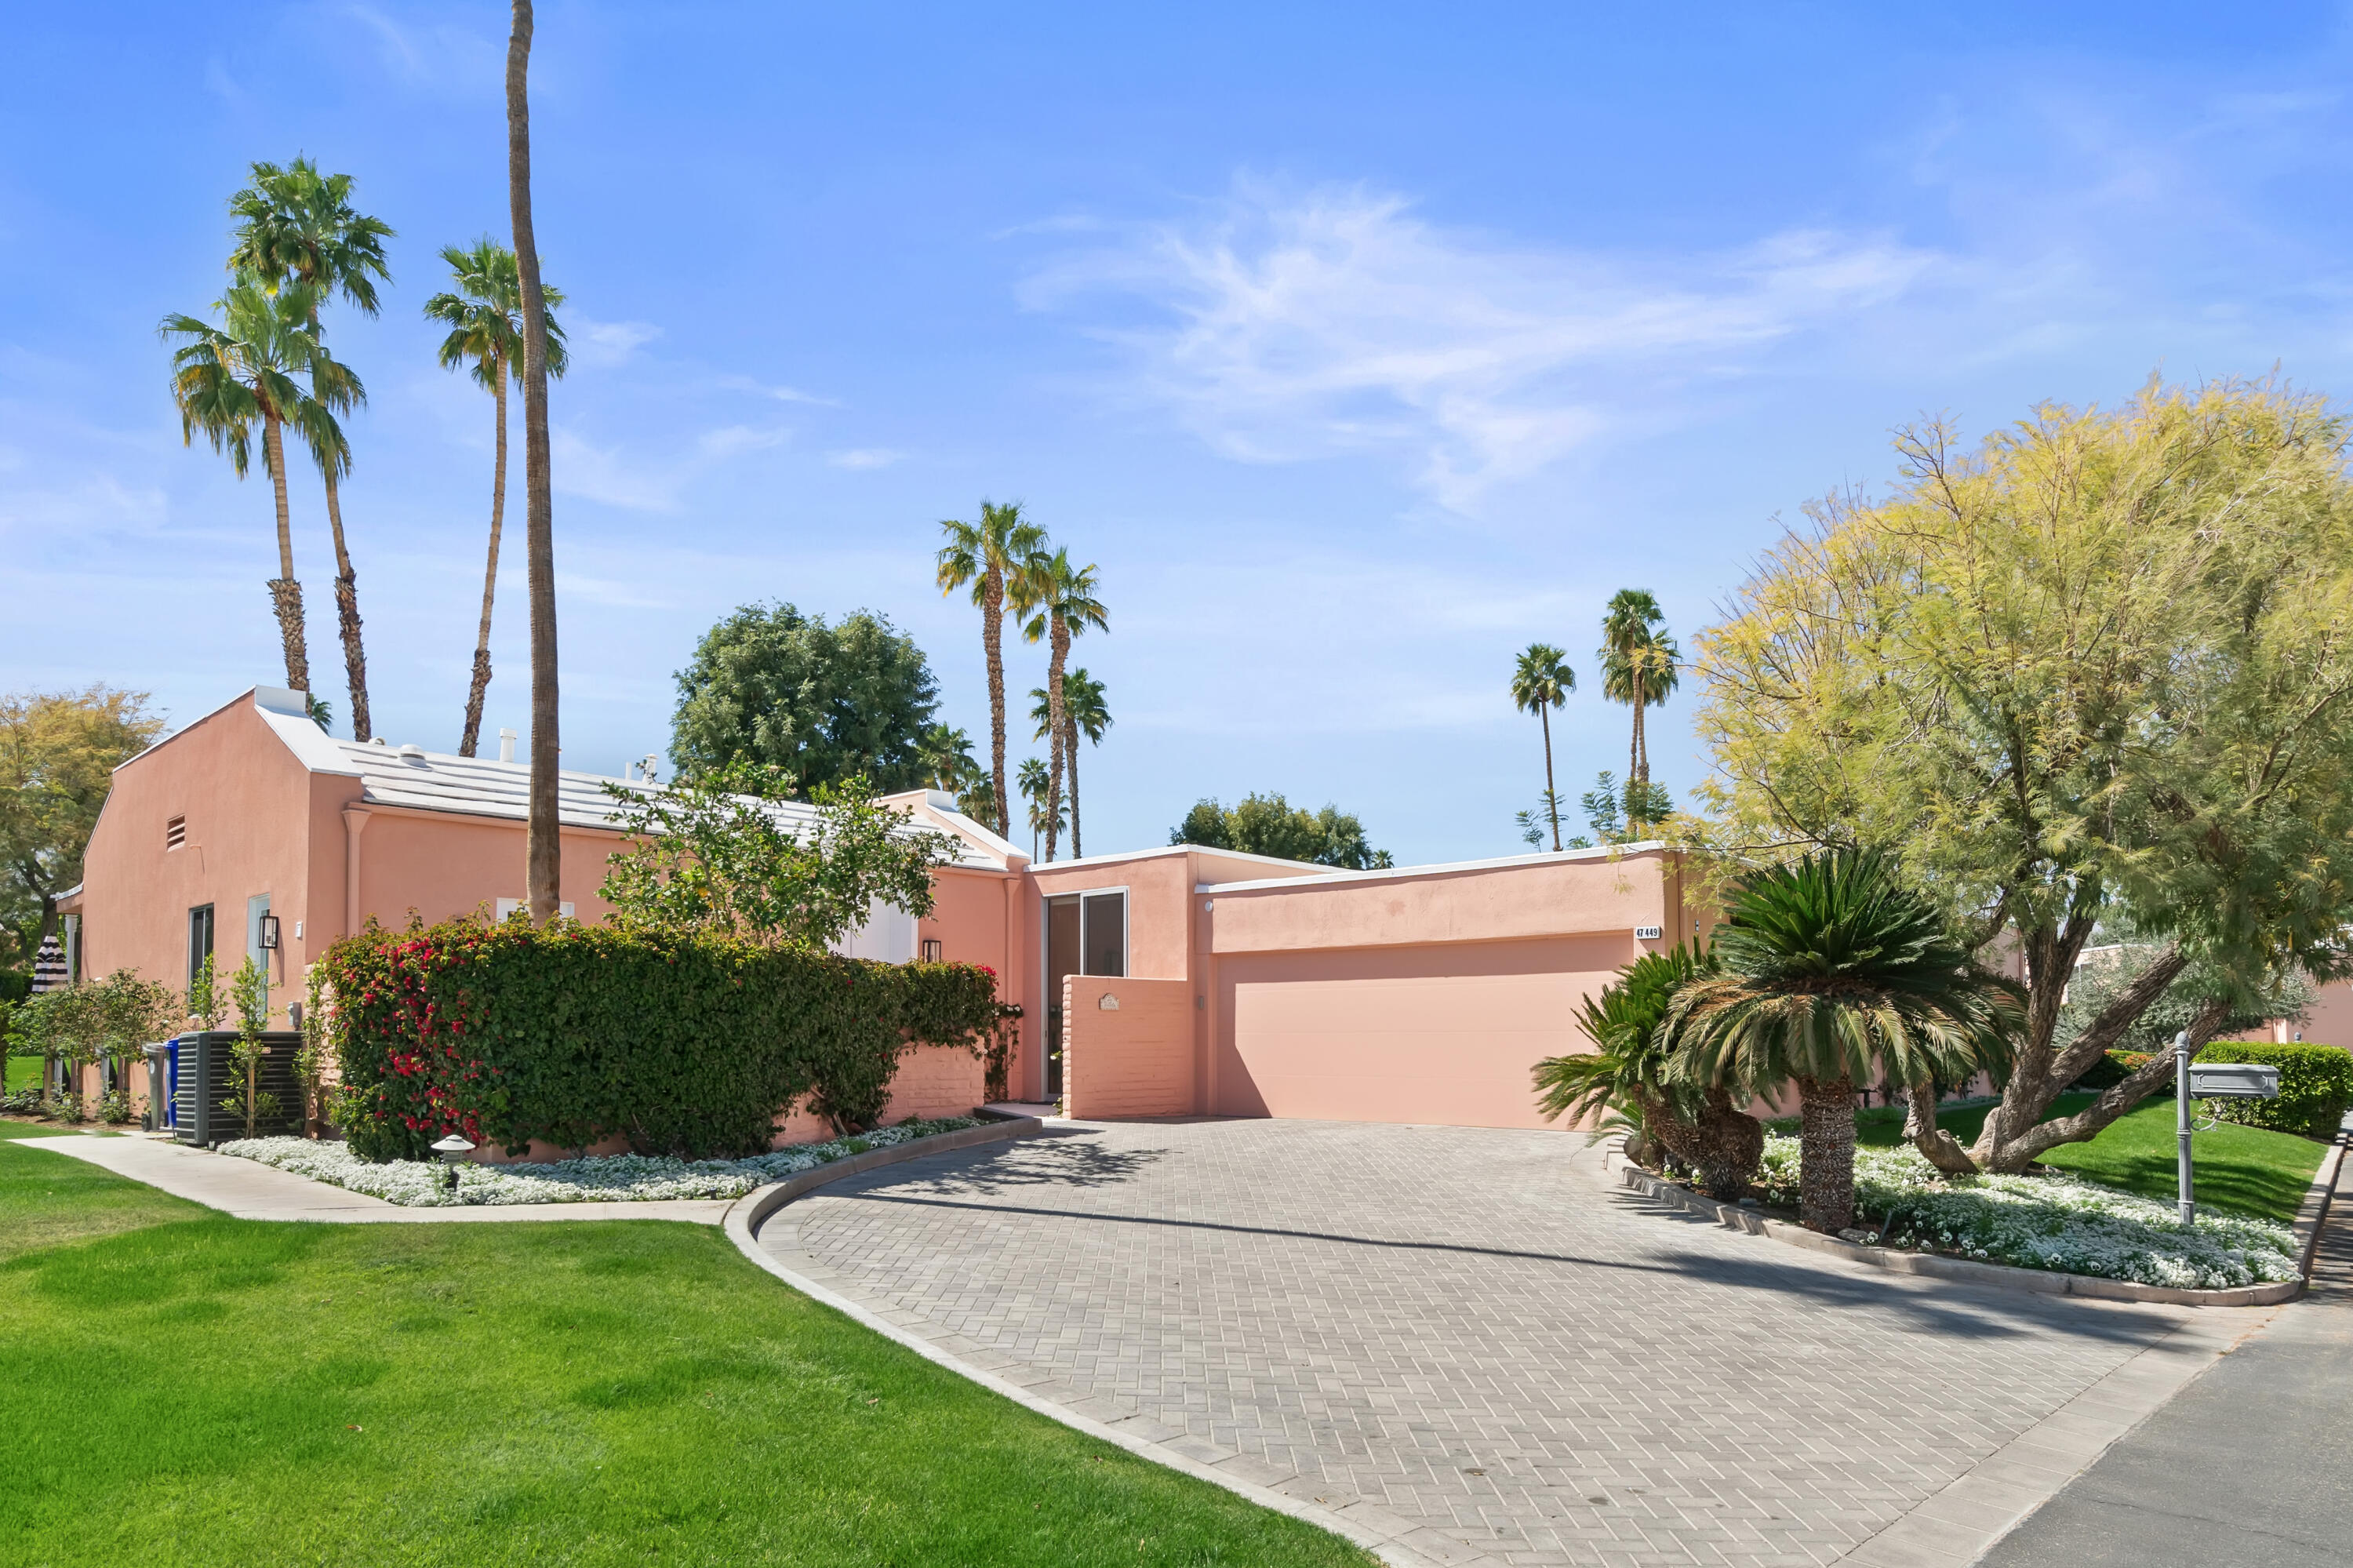 47449 Maroc Circle, Palm Desert, California, 92260, United States, 2 Bedrooms Bedrooms, ,2 BathroomsBathrooms,Residential,For Sale,47449 Maroc Circle,1486016